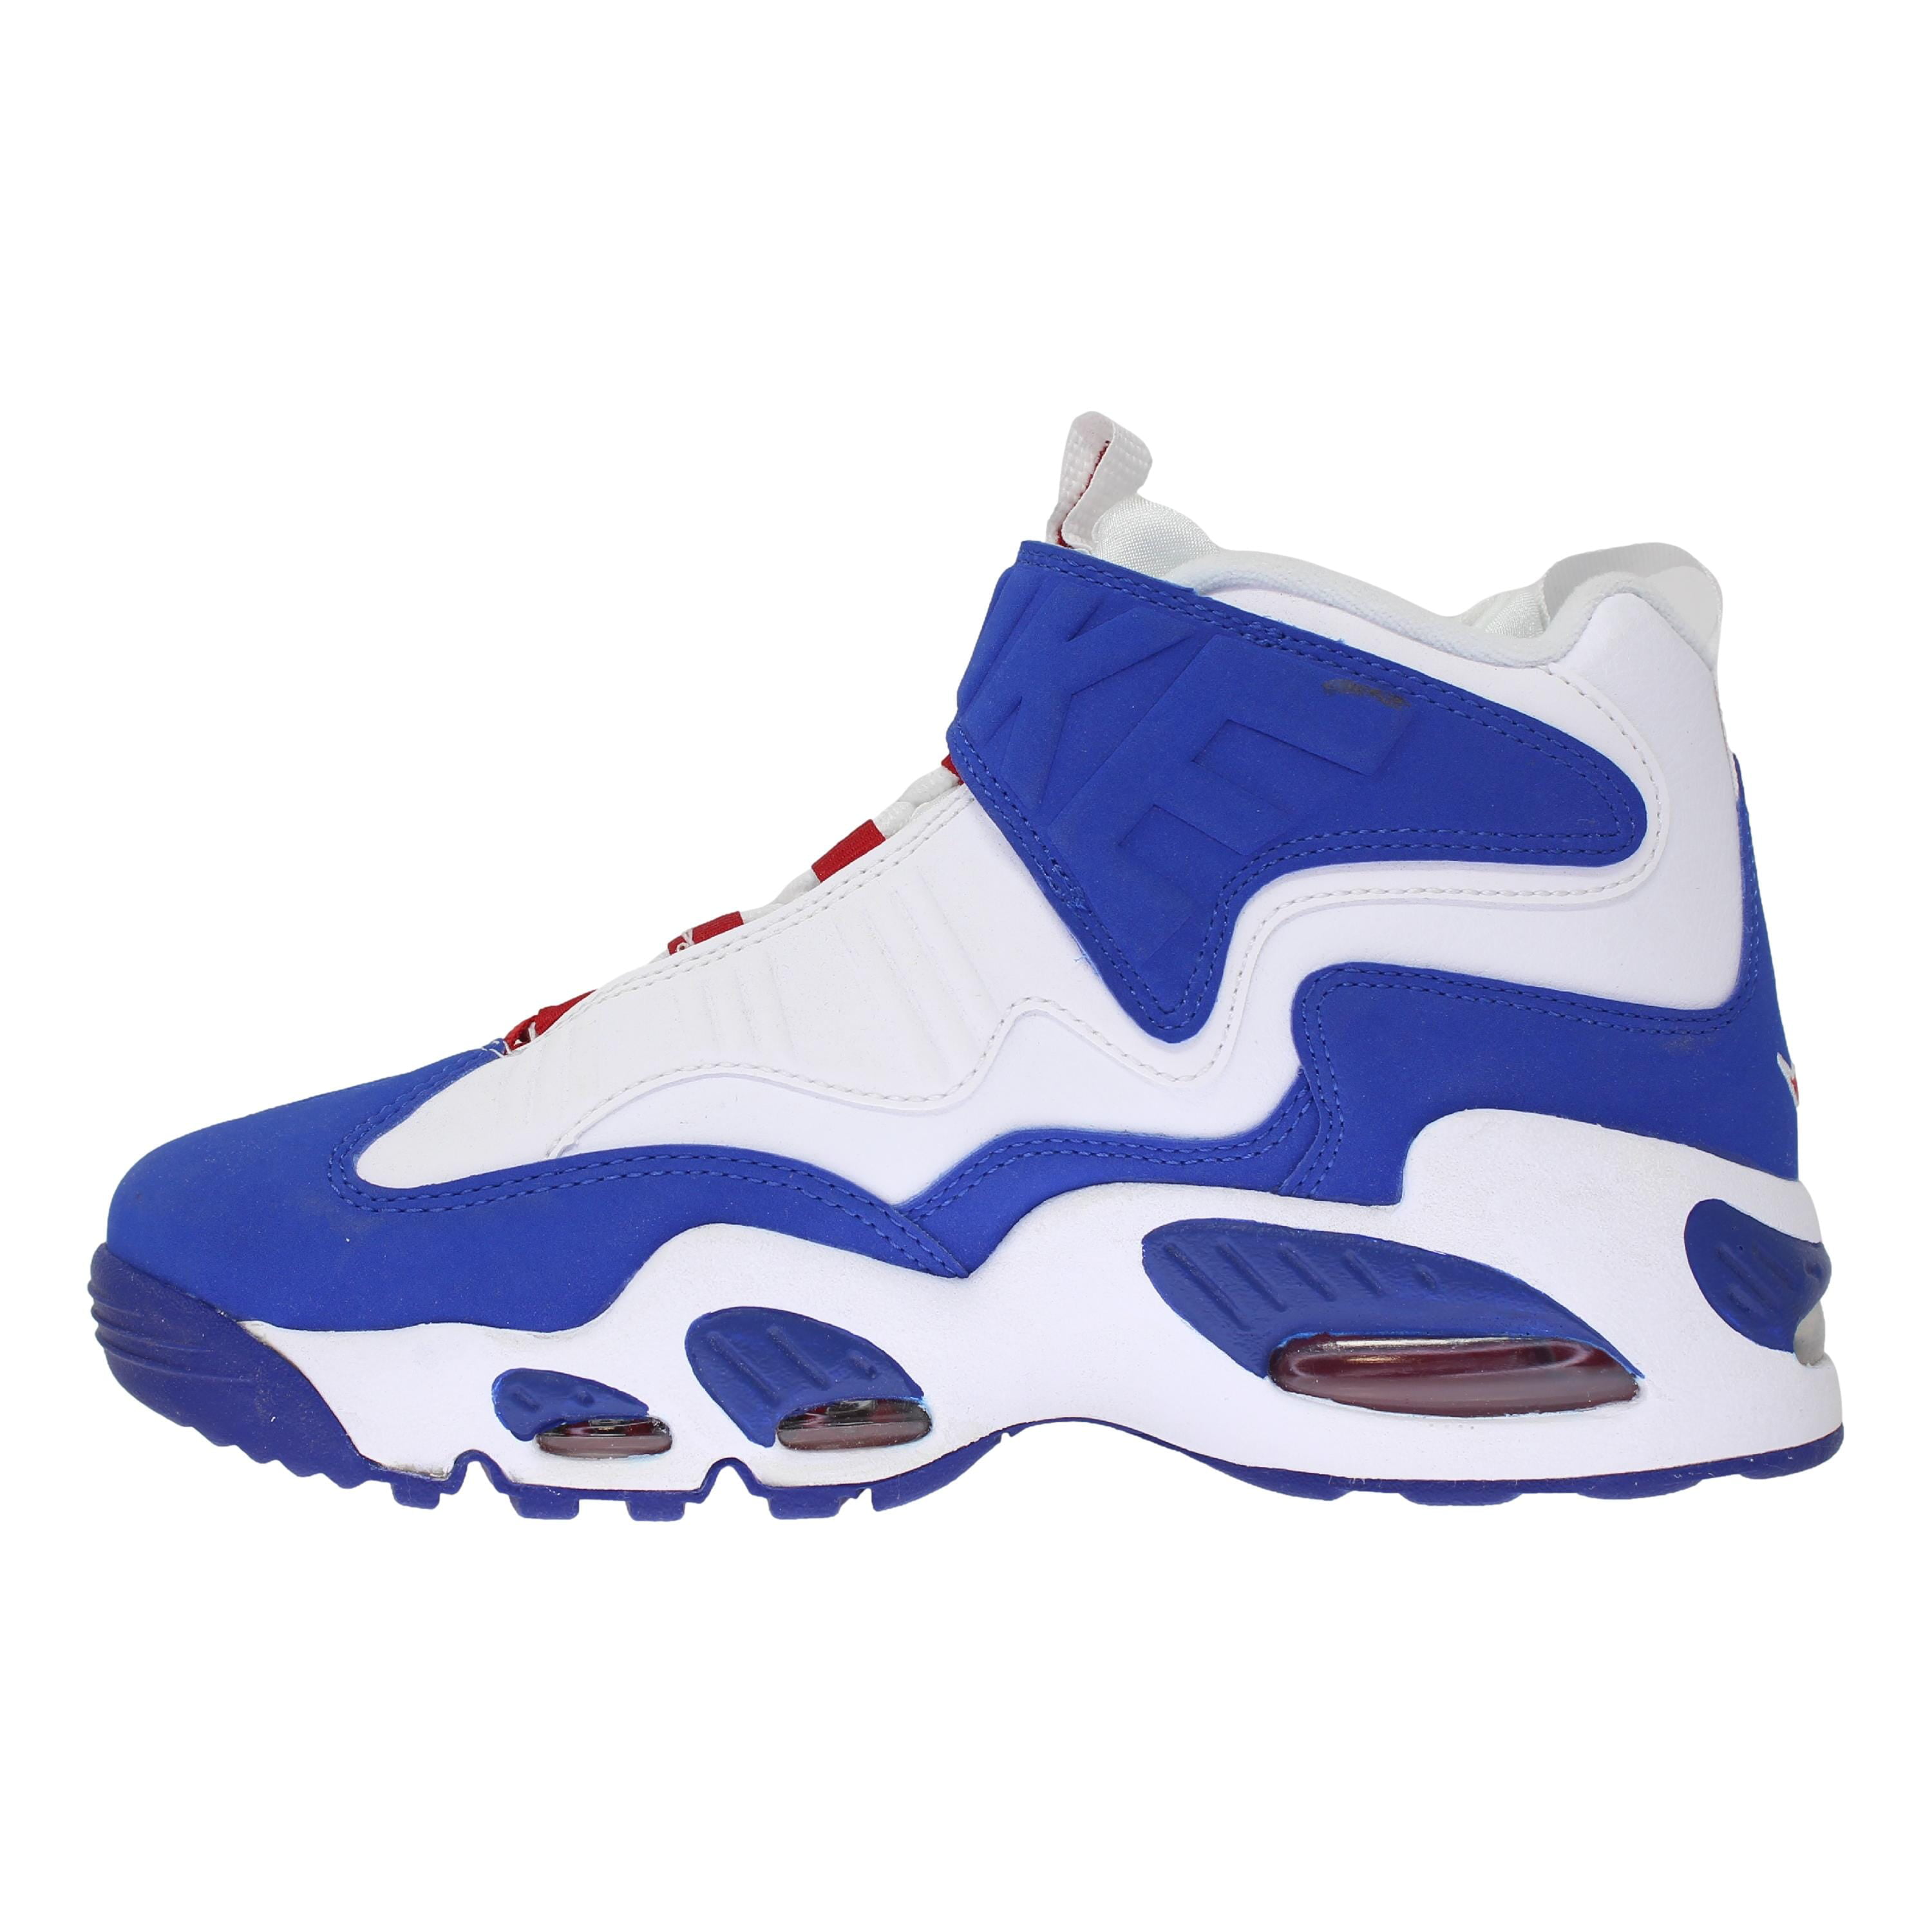 Nike Air Griffey Max 360 “Yacht/Chosen One” - Available 